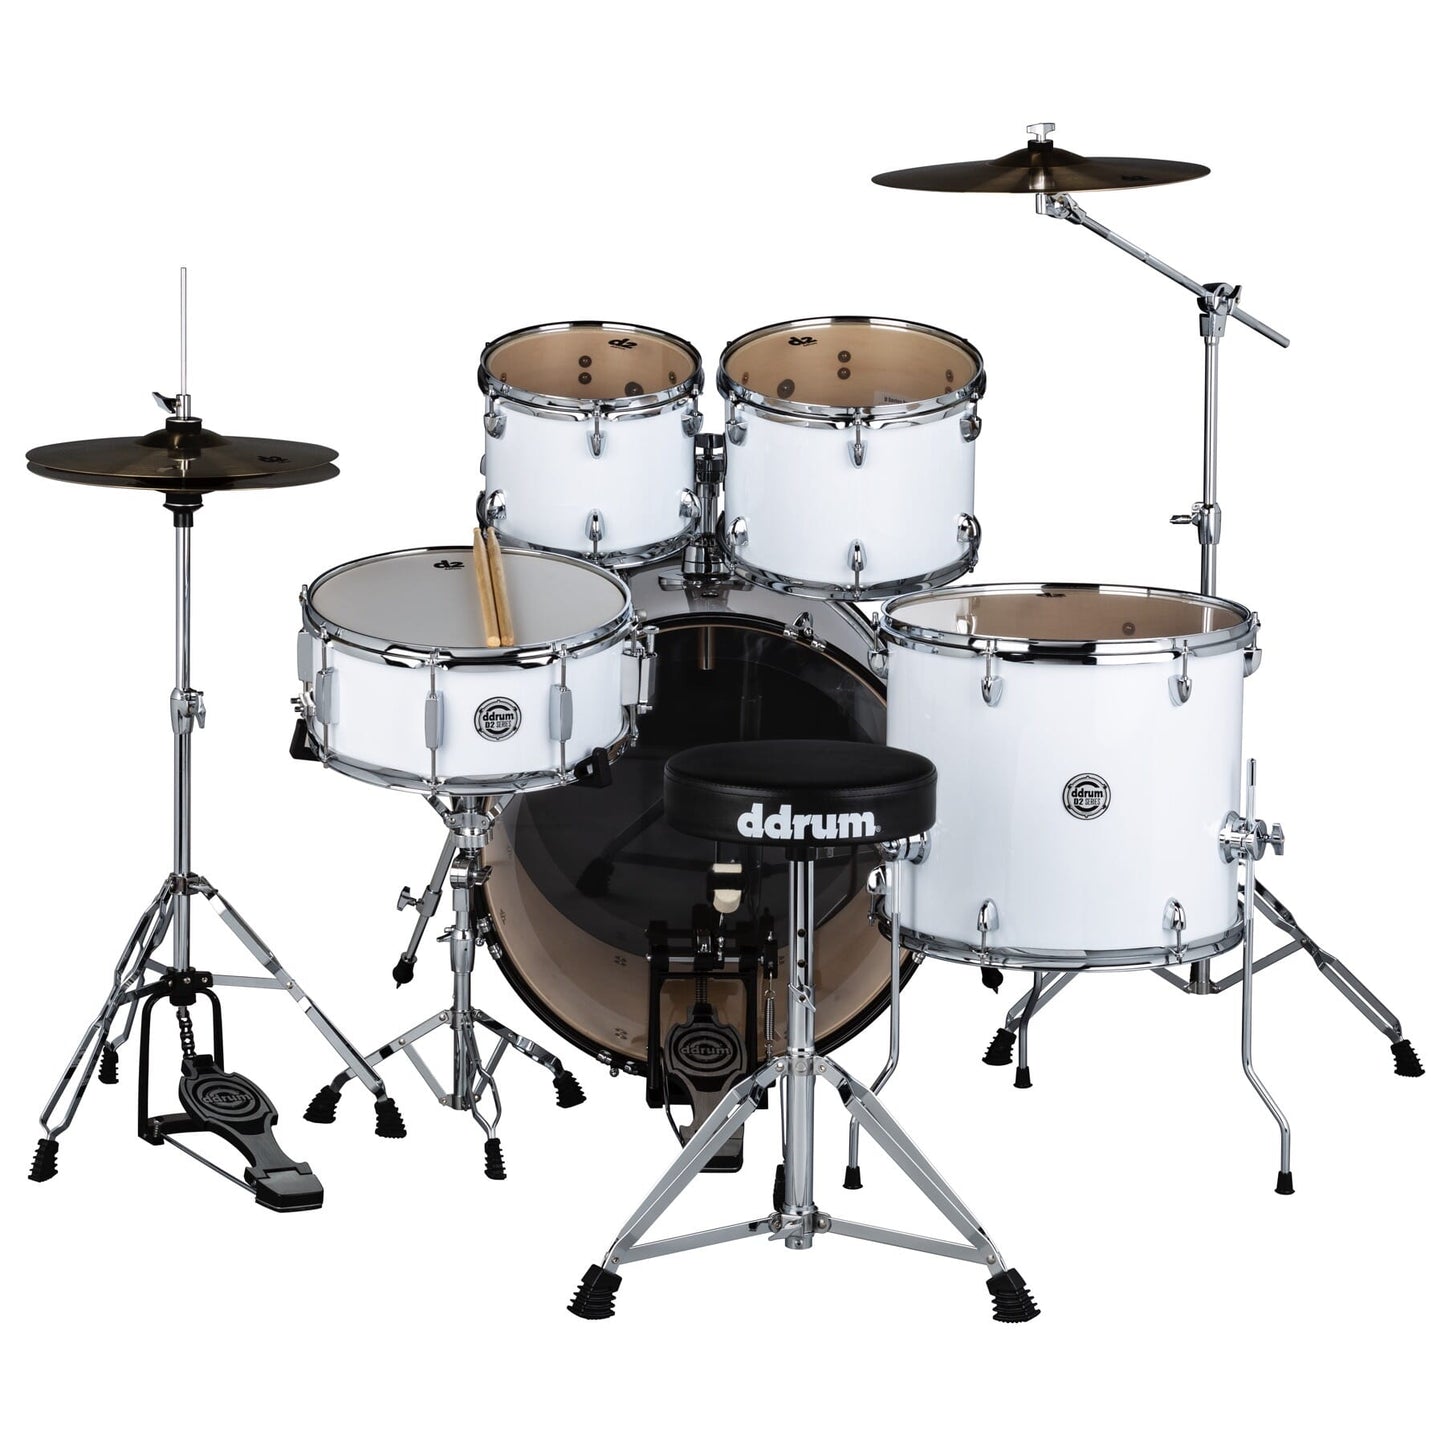 ddrum D2 522 5-Piece Complete Drum Set in Gloss White